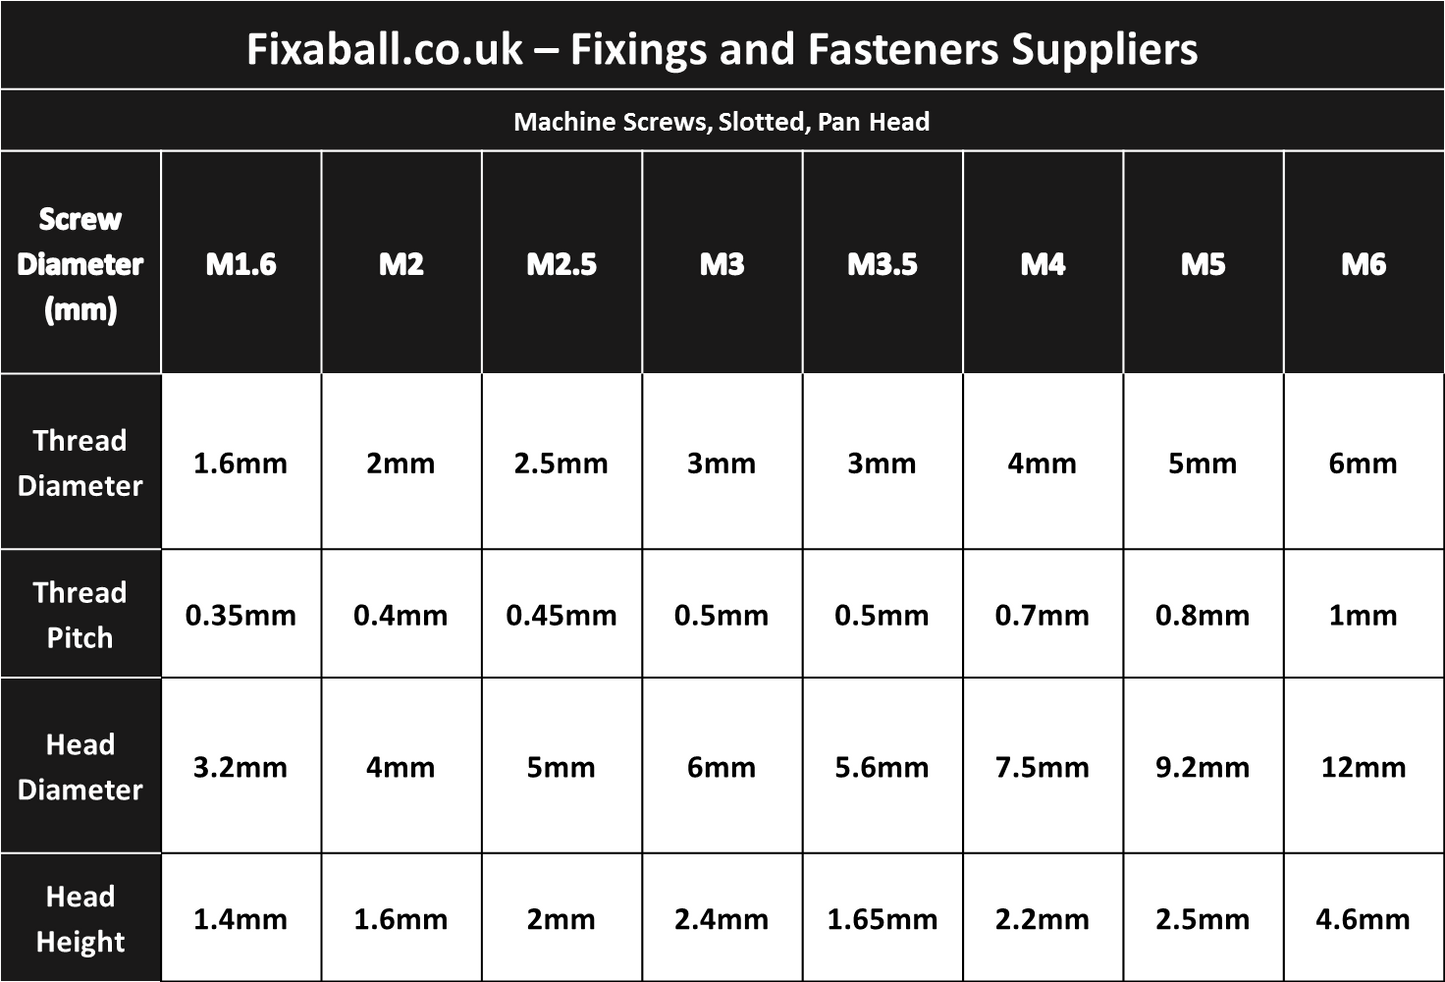 M3.5 Machine Screws Slotted Pan Head Brass DIN 85 - Fixaball Ltd. Fixings and Fasteners UK